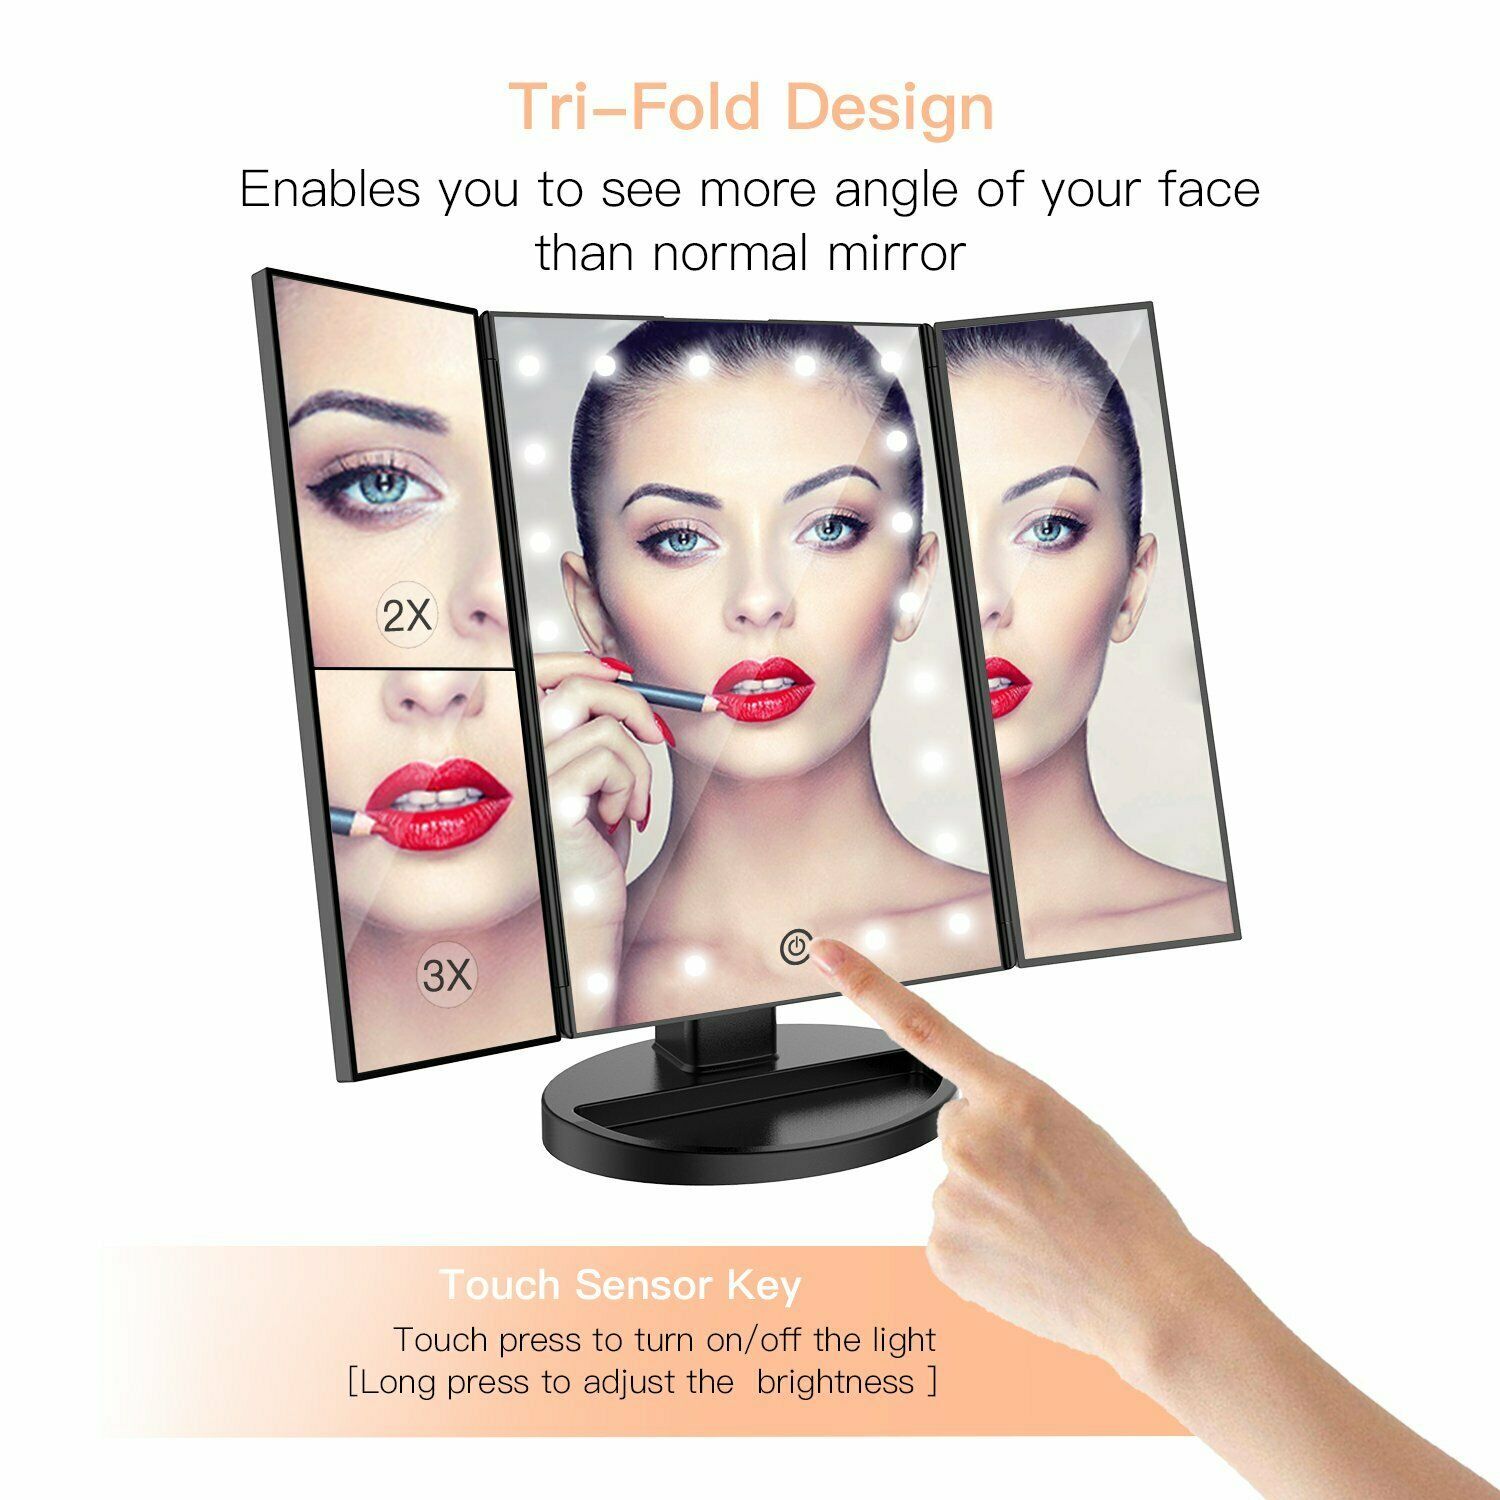 22LED-Tri-Fold-Touch-Screen-Makeup-Mirror-Table-Cosmetic-Vanity-Light-Mirror-1943281-6